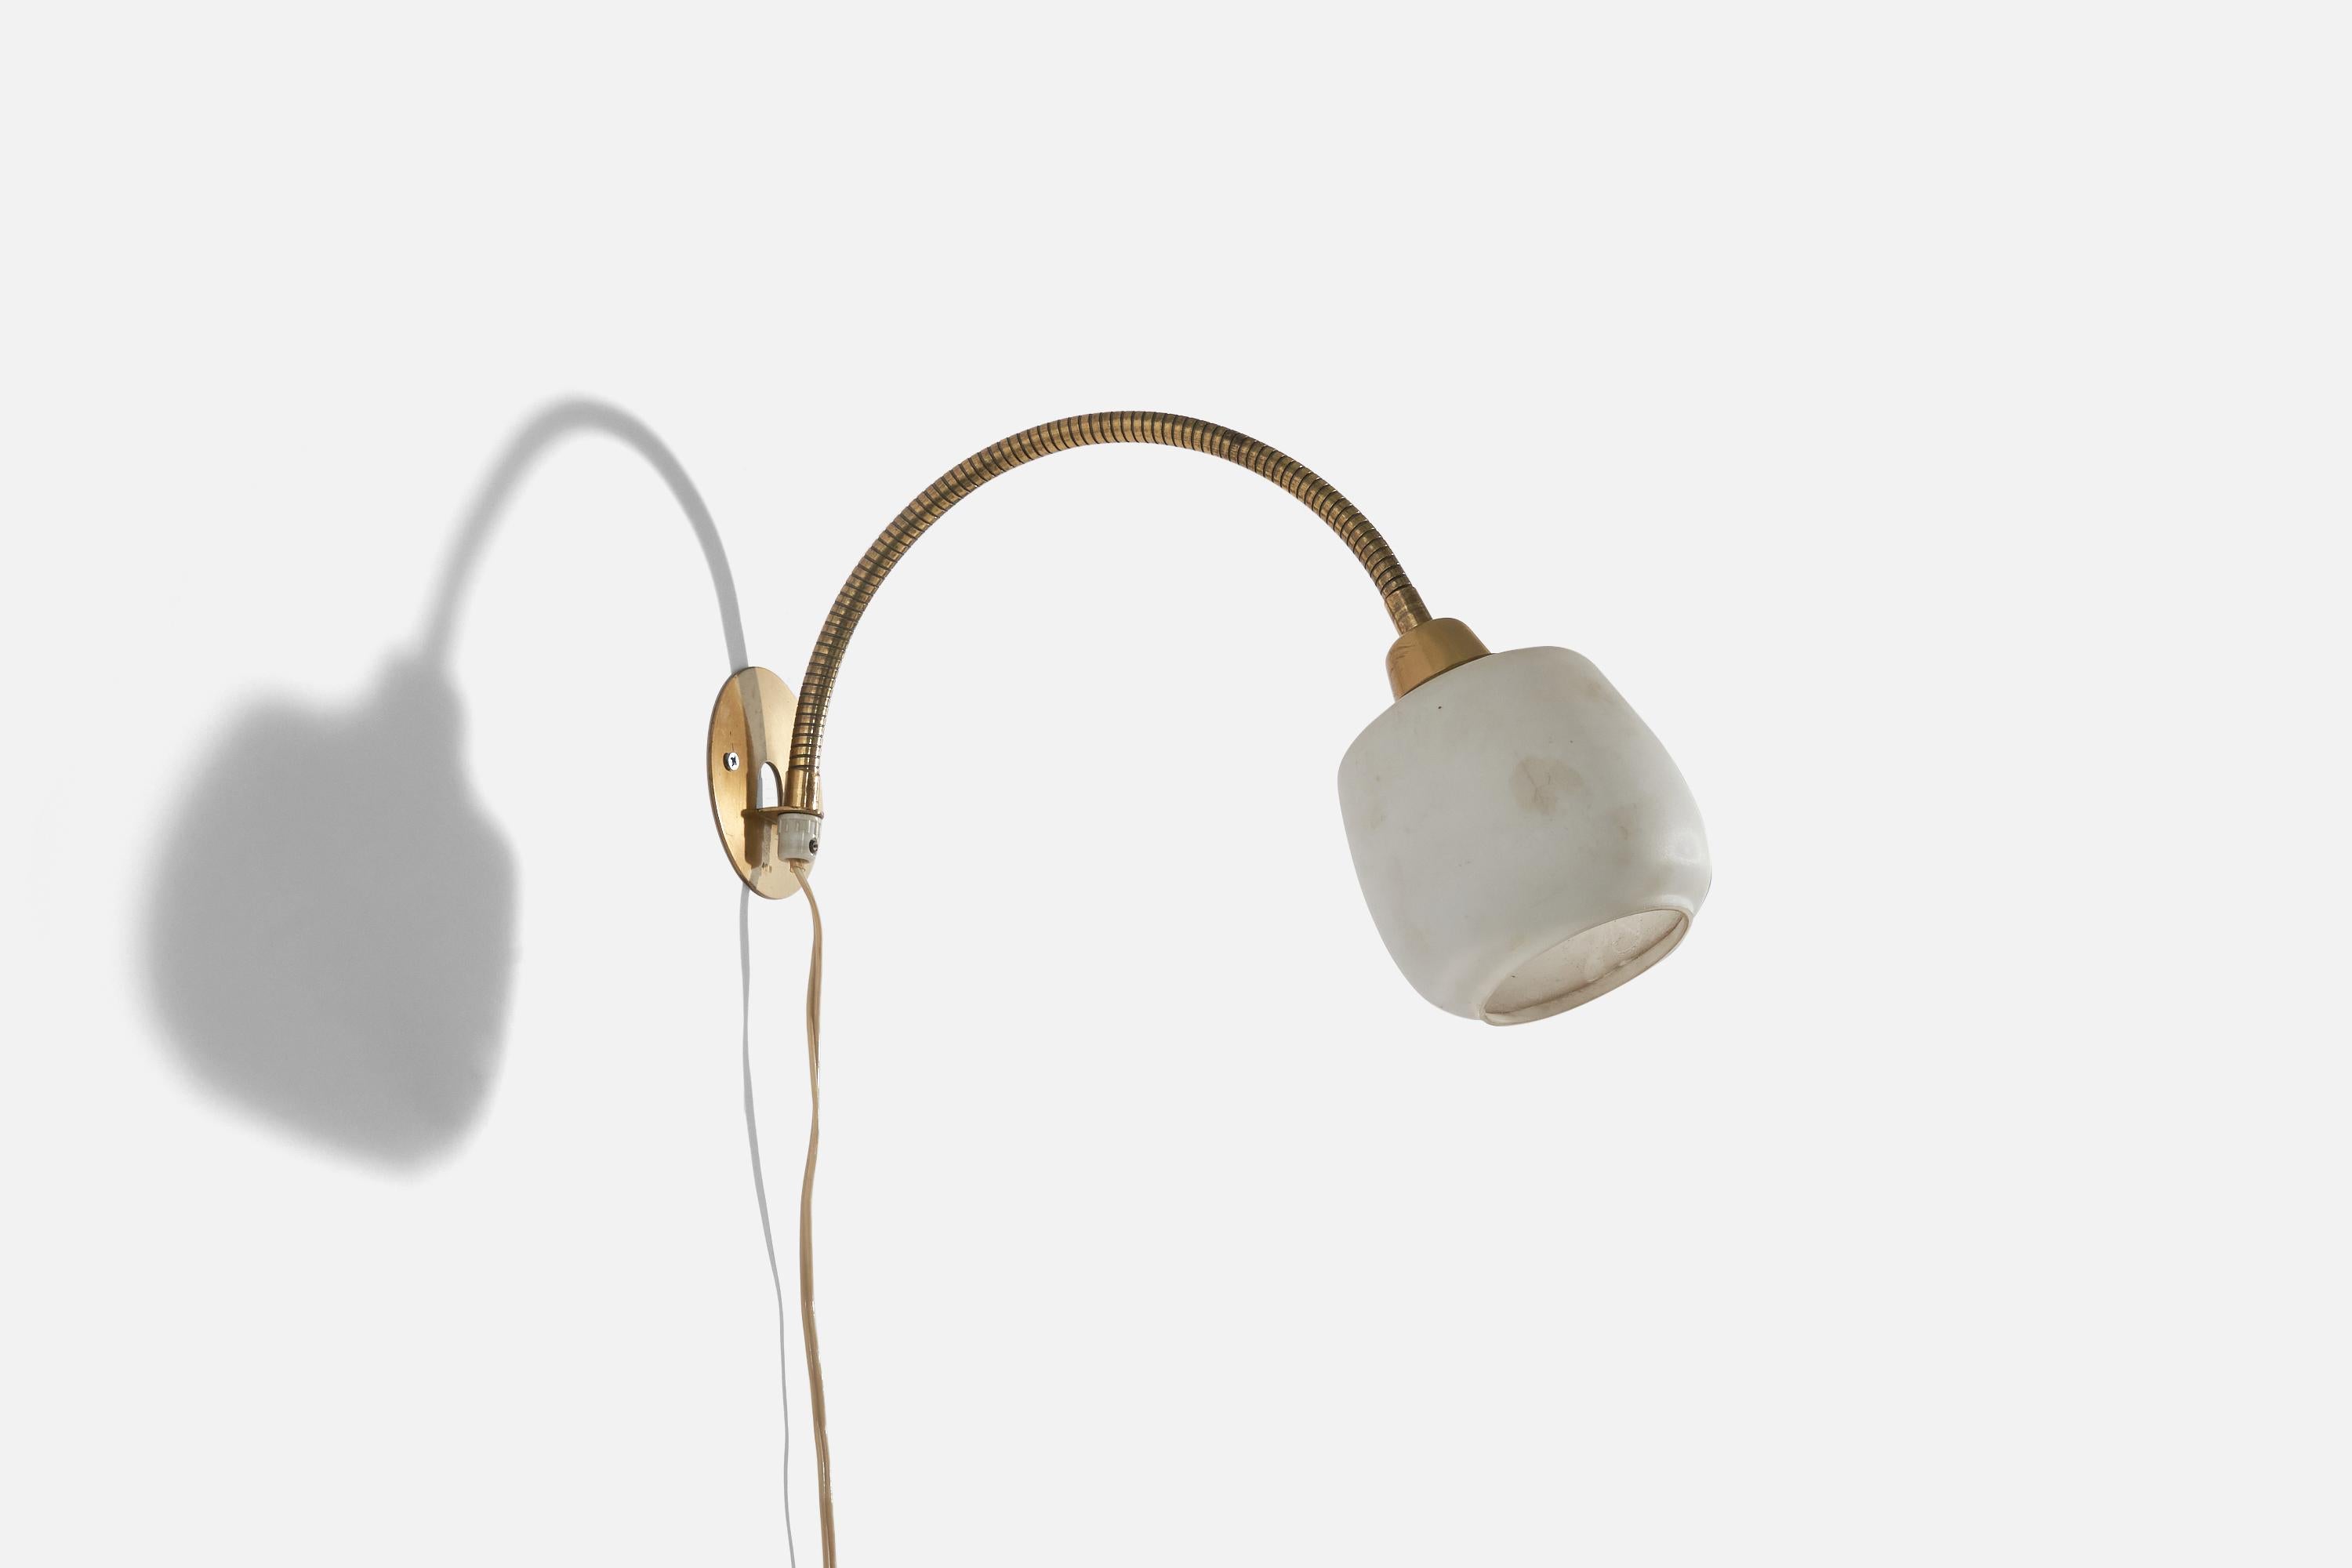 A brass and glass wall light designed and produced in Sweden, c. 1940s.

Variable dimensions, measured as illustrated in the first image. 

Dimensions of back plate (inches) : (3.81 x 3.81 x .06).